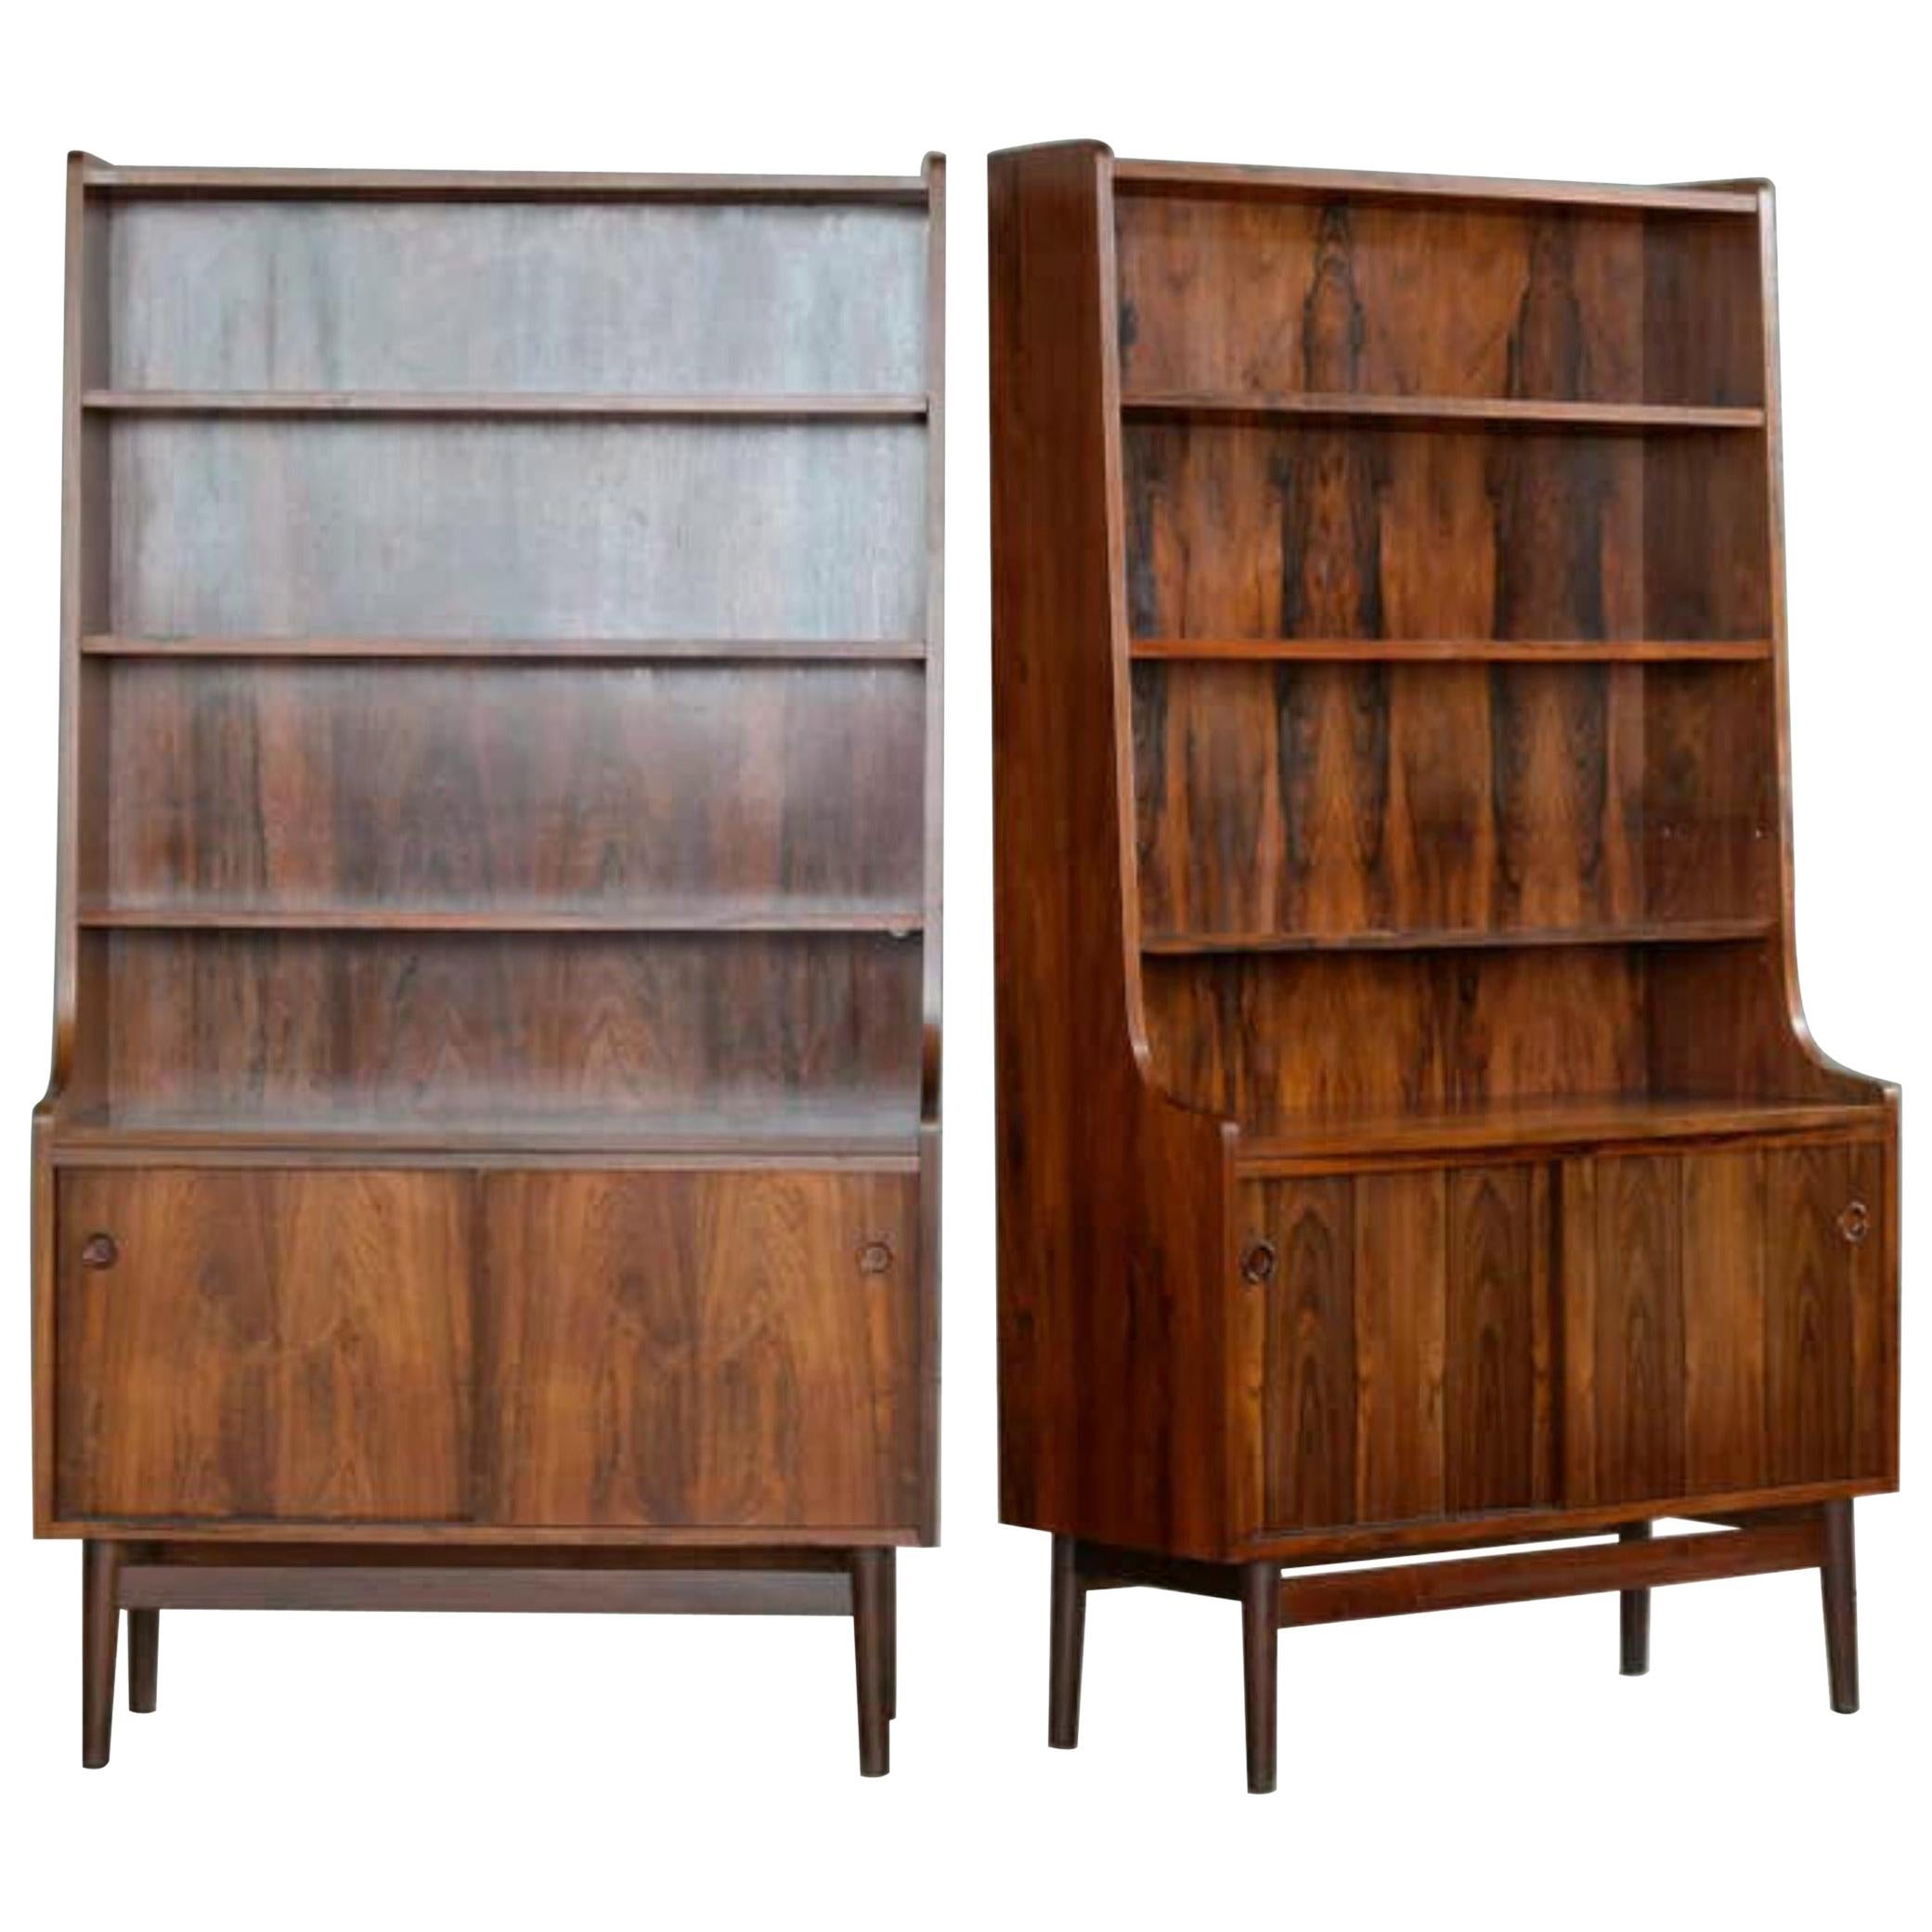 1960s Danish Modern Midcentury Pair of Bookcases in Rosewood by Johannes Sorth